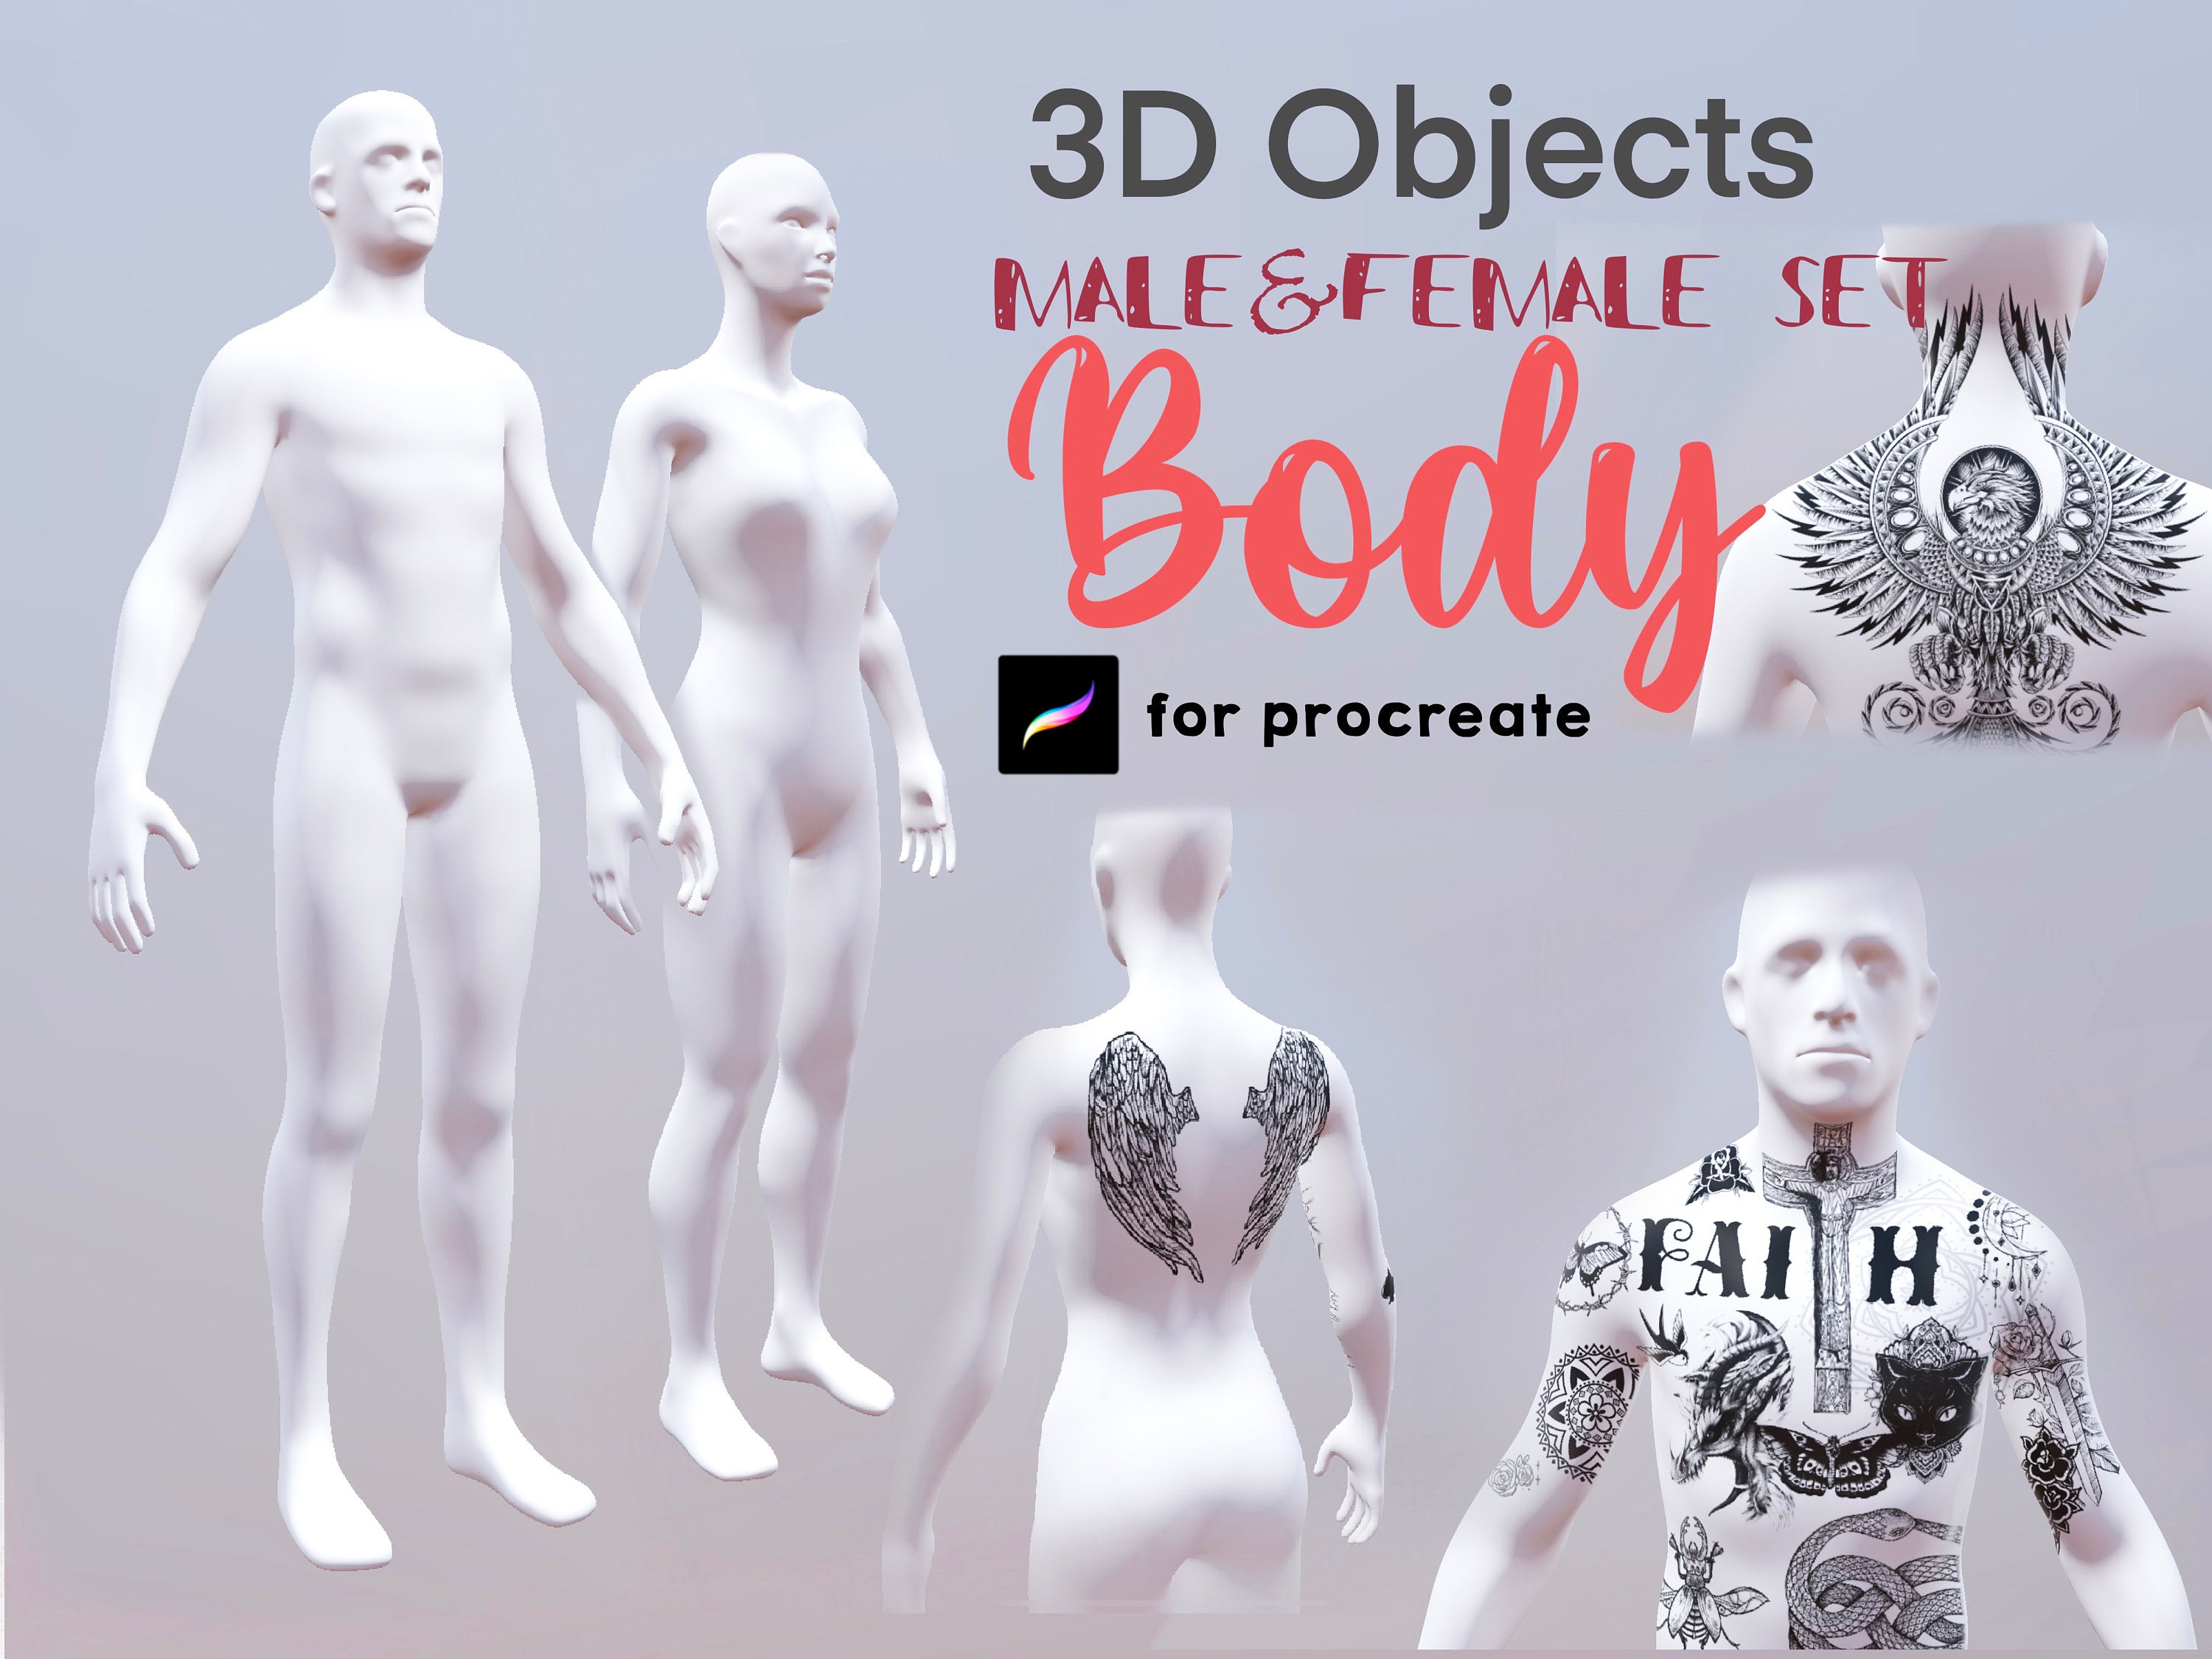 Clothing Previewer and 3D drawing (e.g. Procreate 3D) - Community